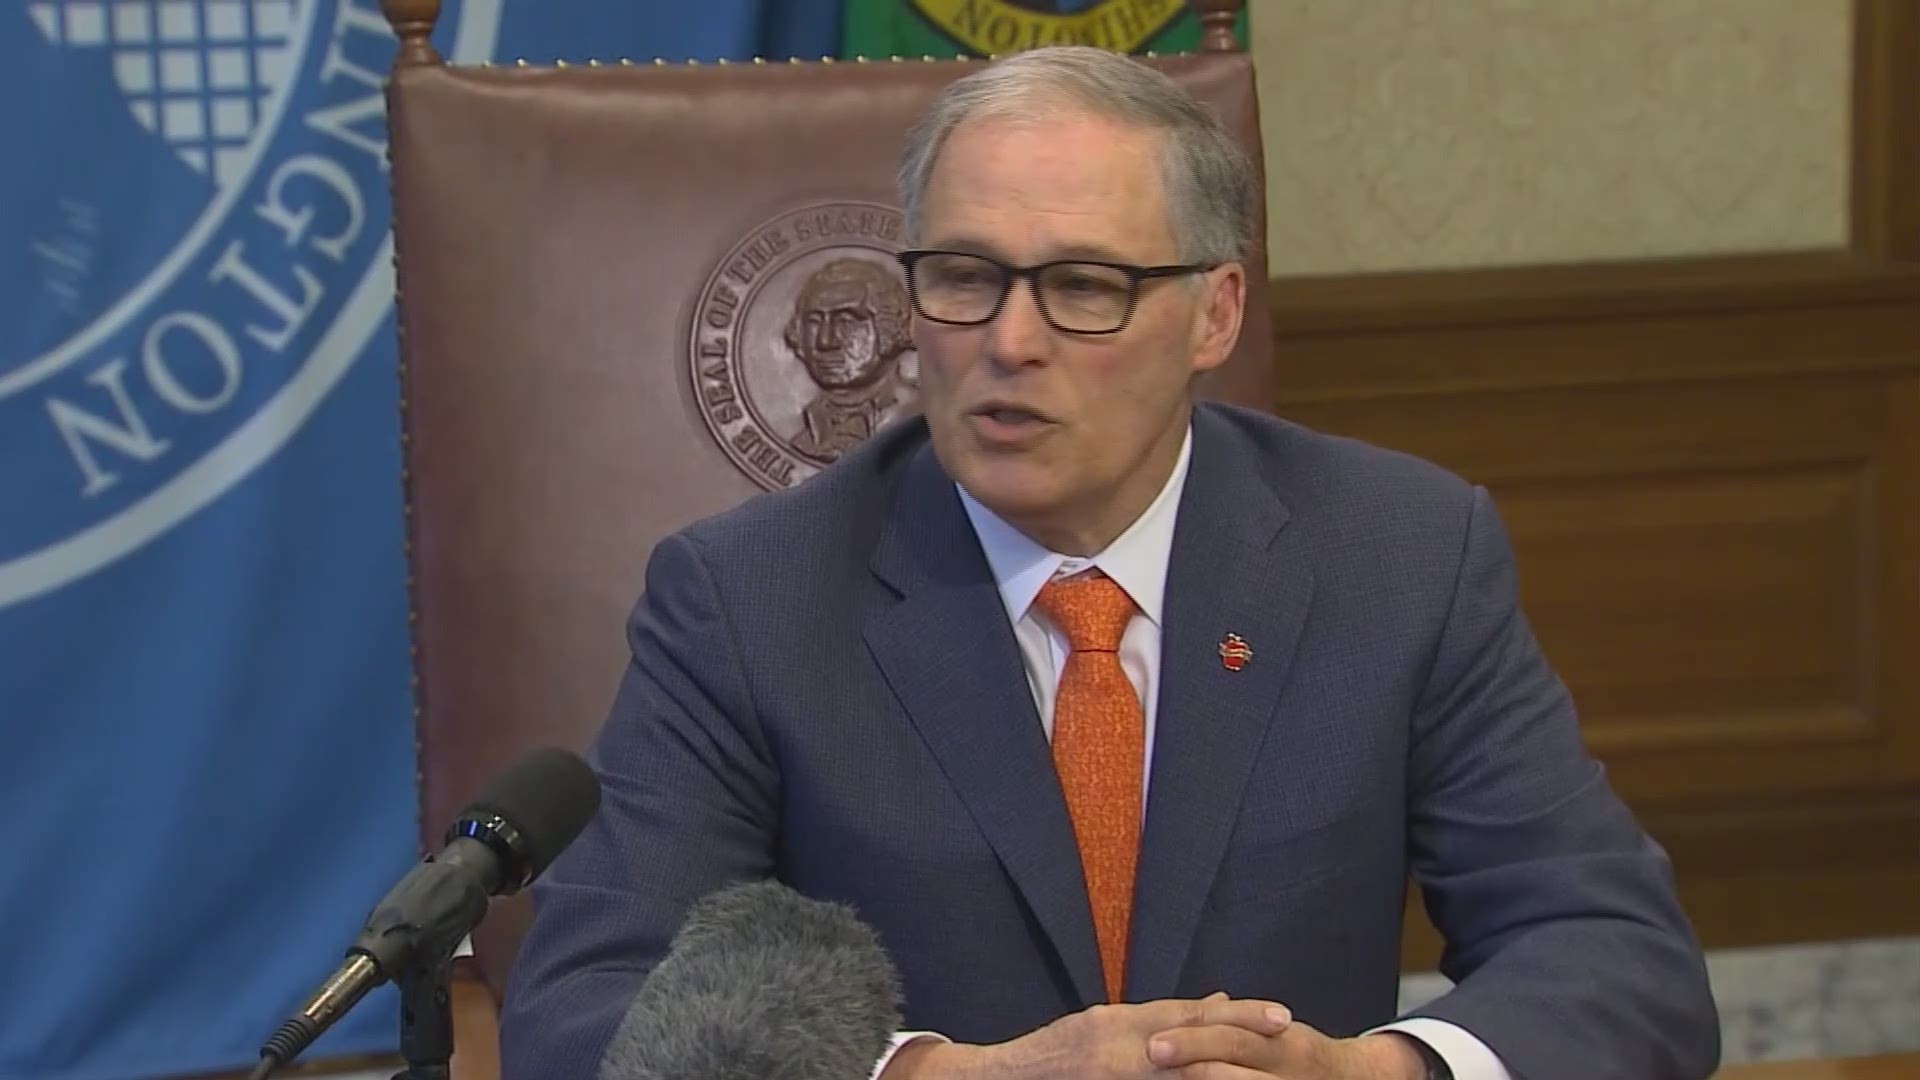 Gov. Inslee signed a bill into law moving the presidential primary up from May to March.